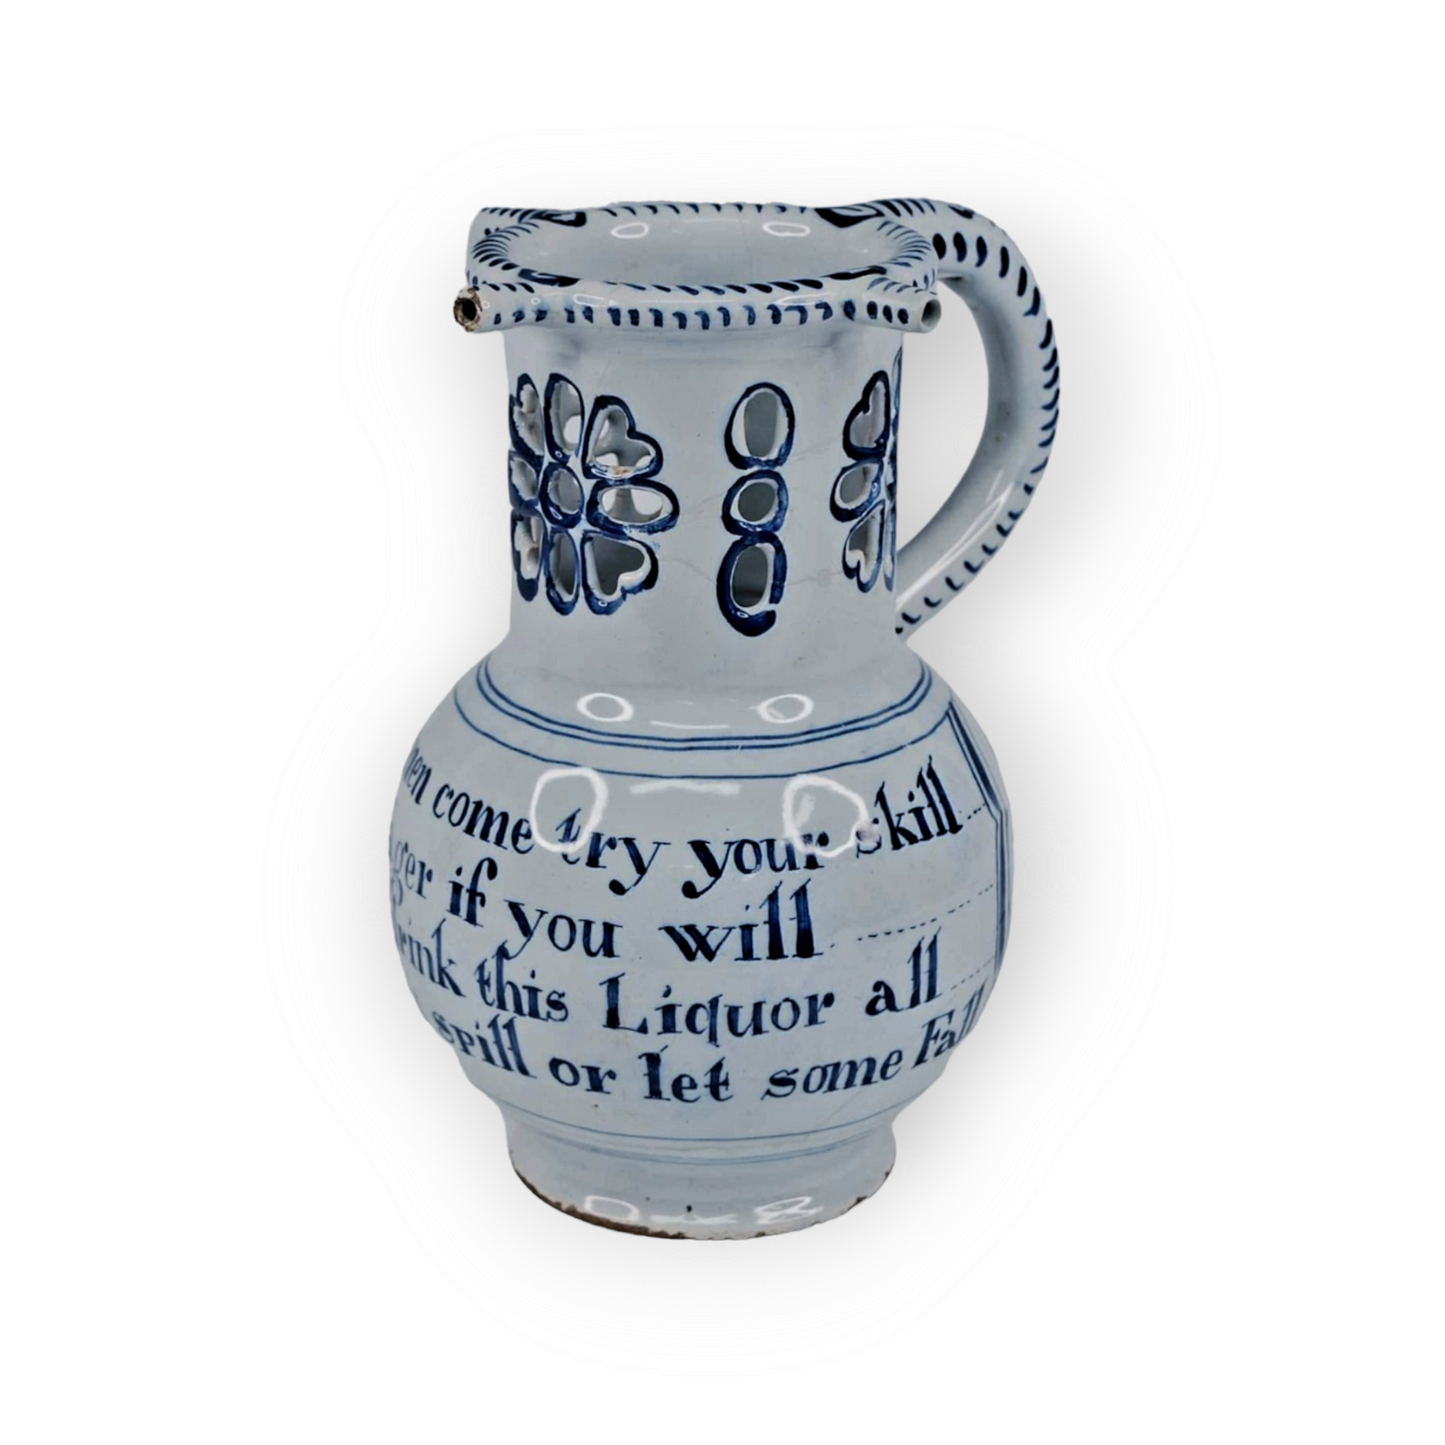 Mid 18thC English Antique Blue & White Delftware Puzzle Jug, Attributed to Liverpool, Circa 1765